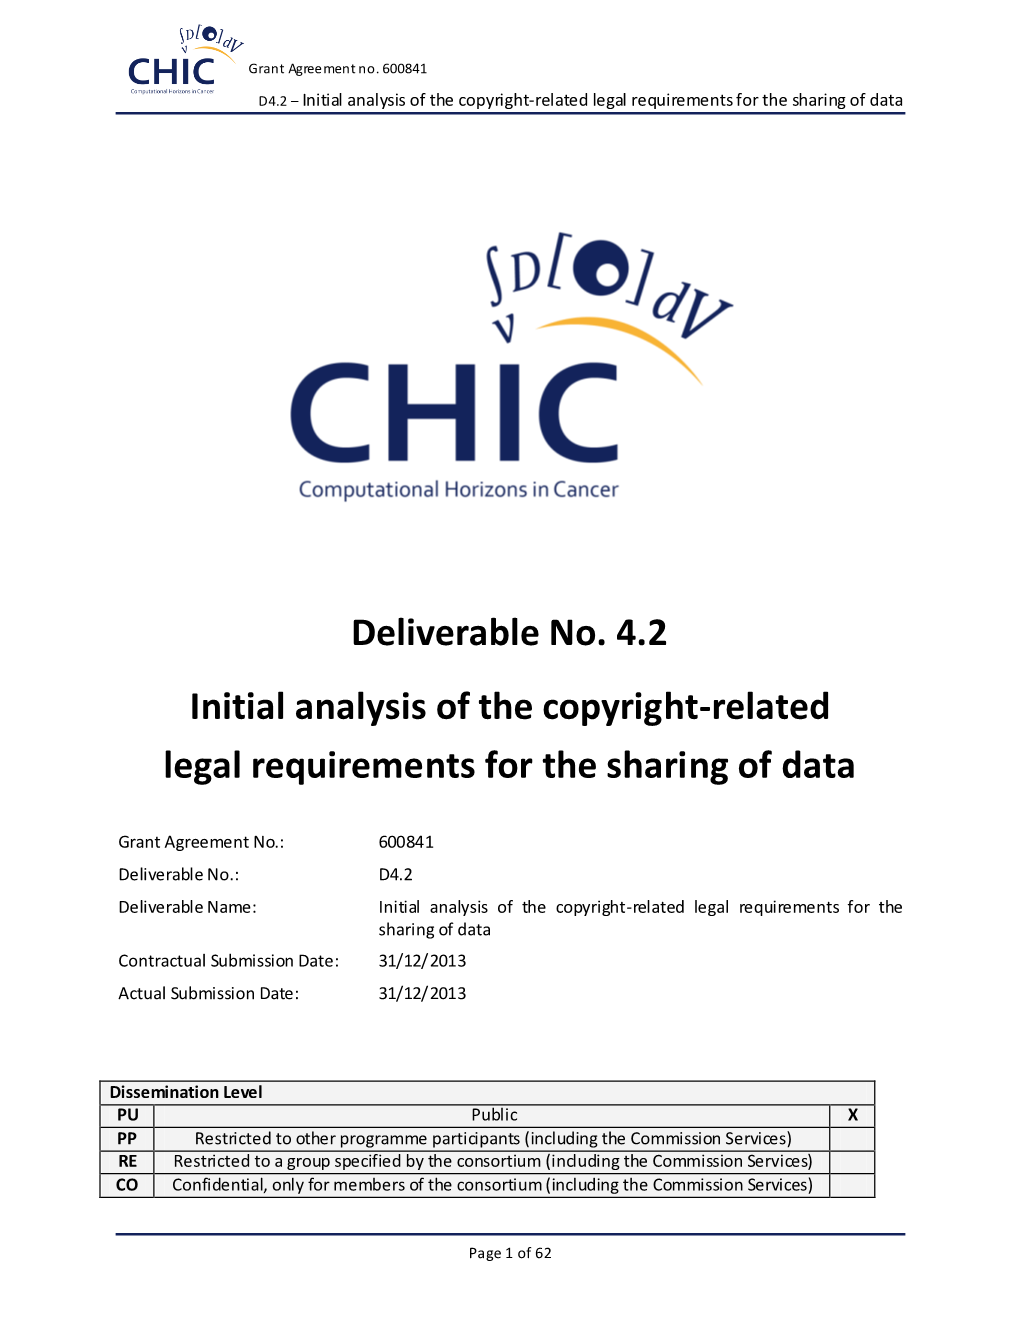 Deliverable No. 4.2 Initial Analysis of the Copyright-Related Legal